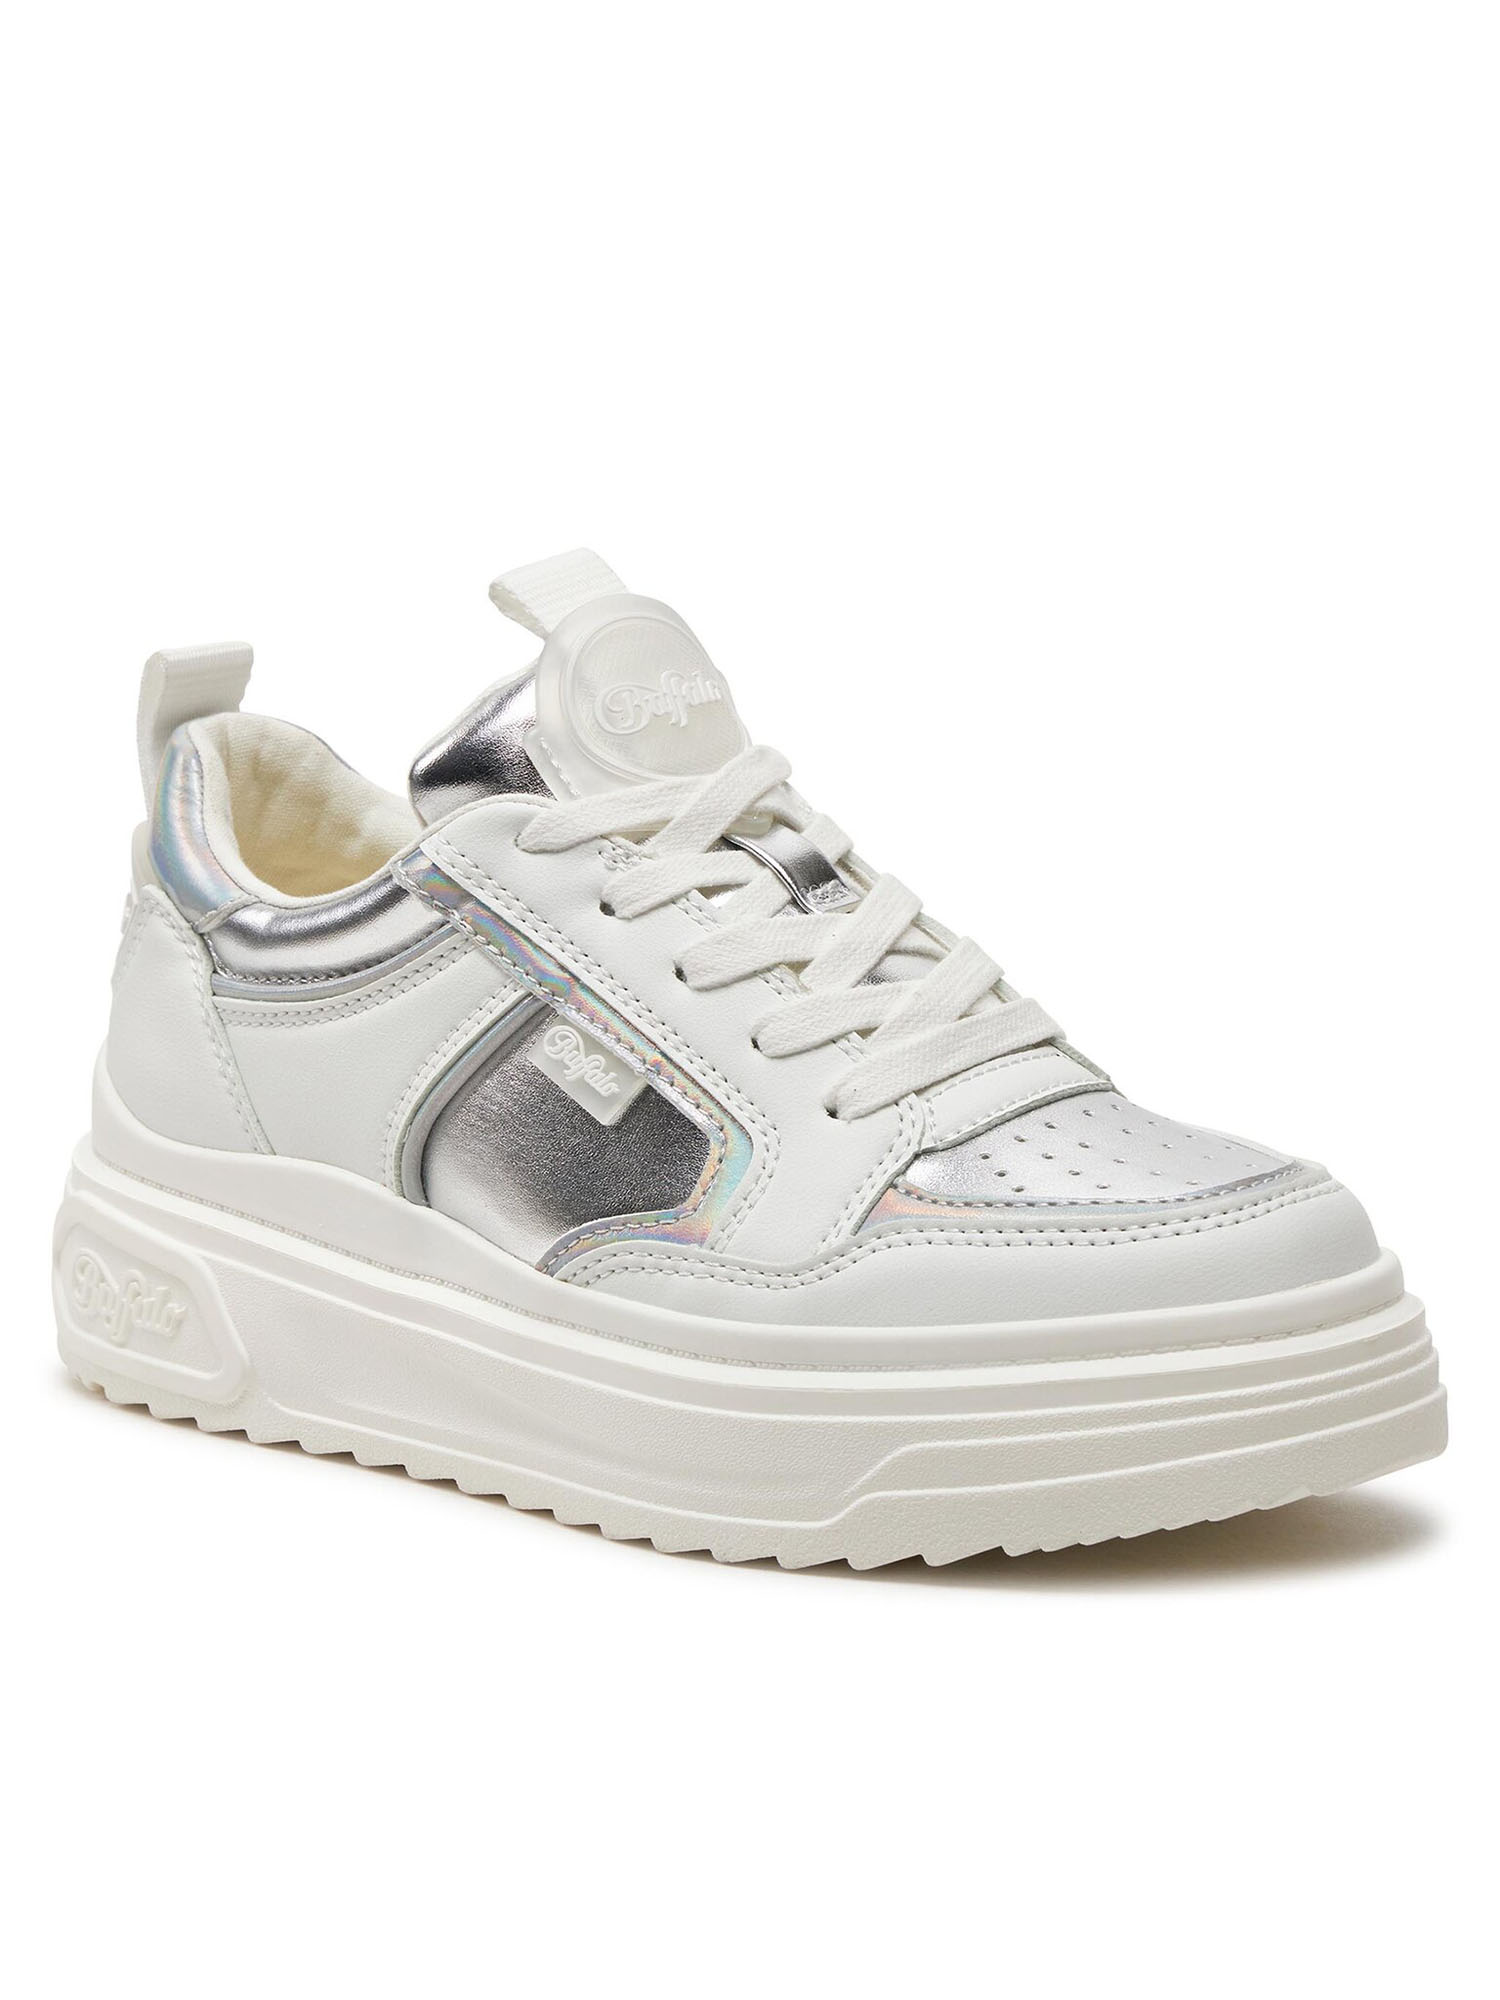 SNEAKERS VECTRA LOW BUFFALO DONNA BIANCO ARGENTO